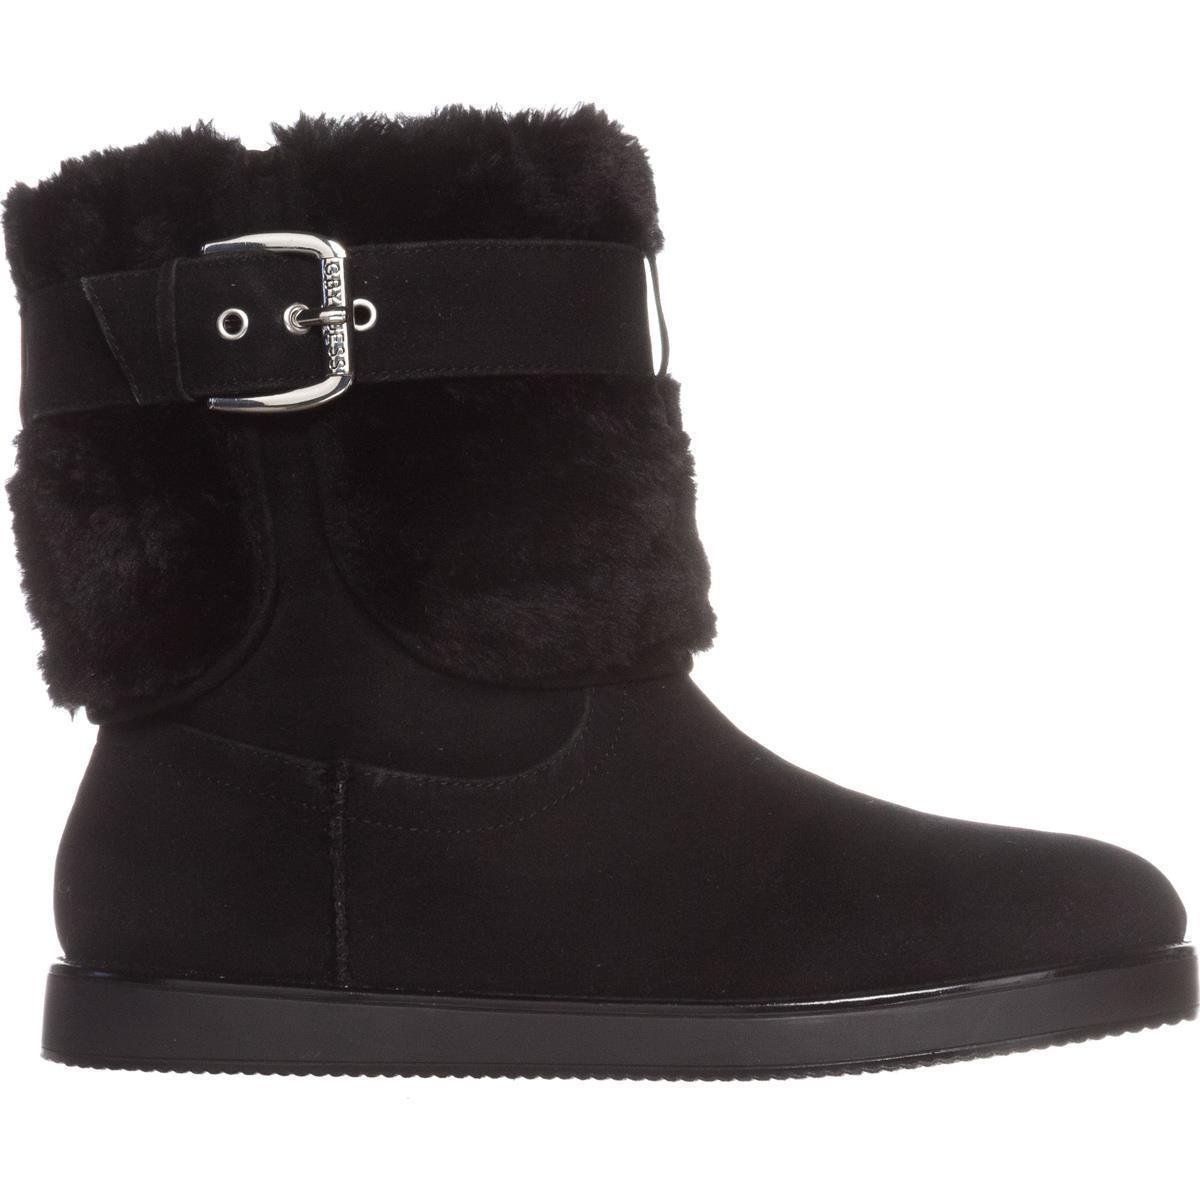 G by Guess Womens Amburr Closed Toe Ankle Cold Weather Boots, Black ...